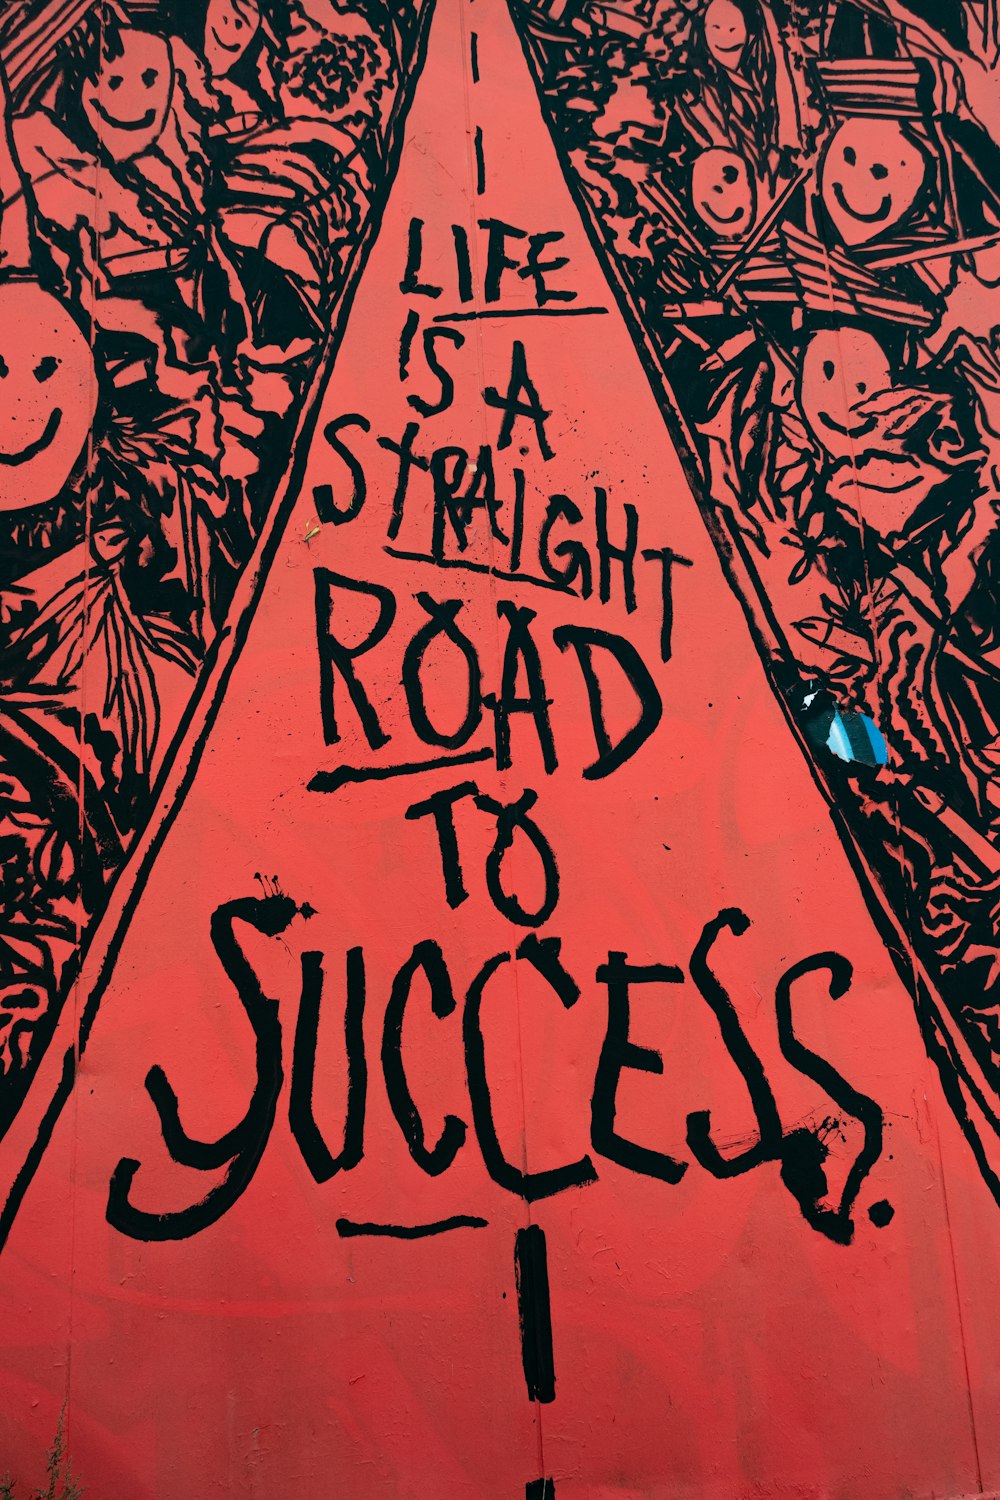 Life is a Straight Road to Success artwork